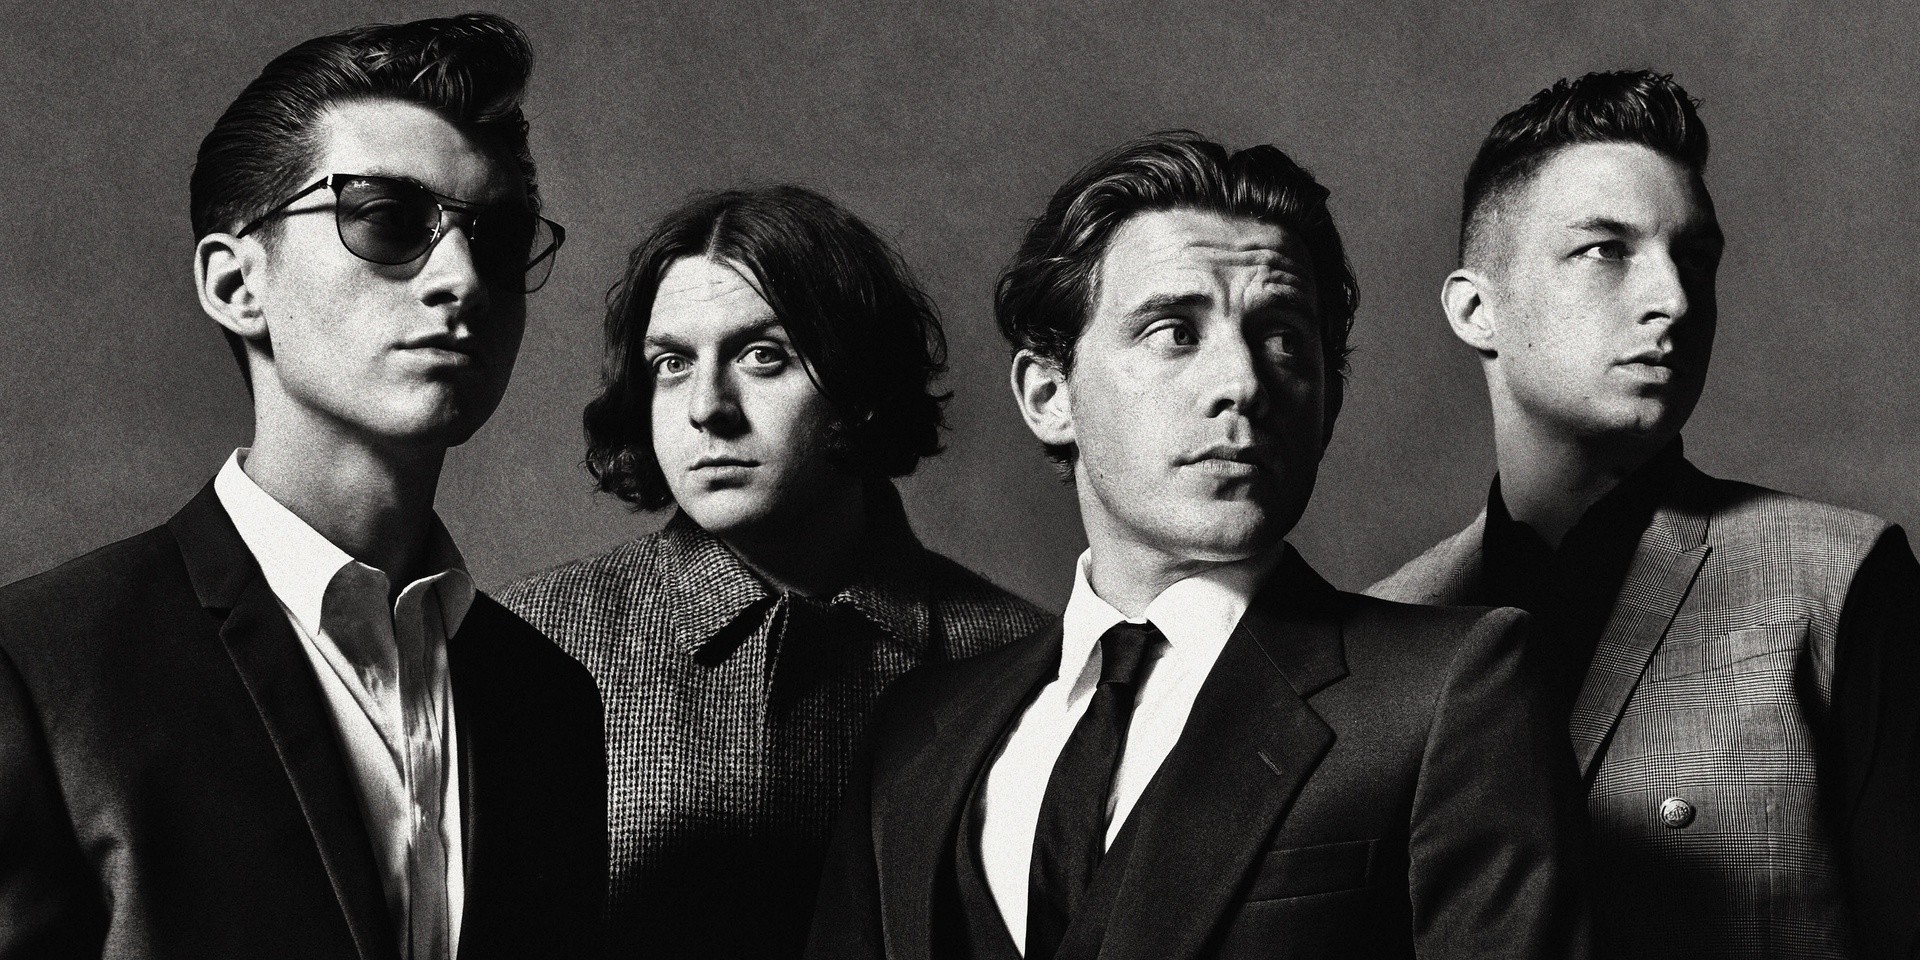 Arctic Monkeys announce new album Tranquility Base Hotel & Casino out May 11